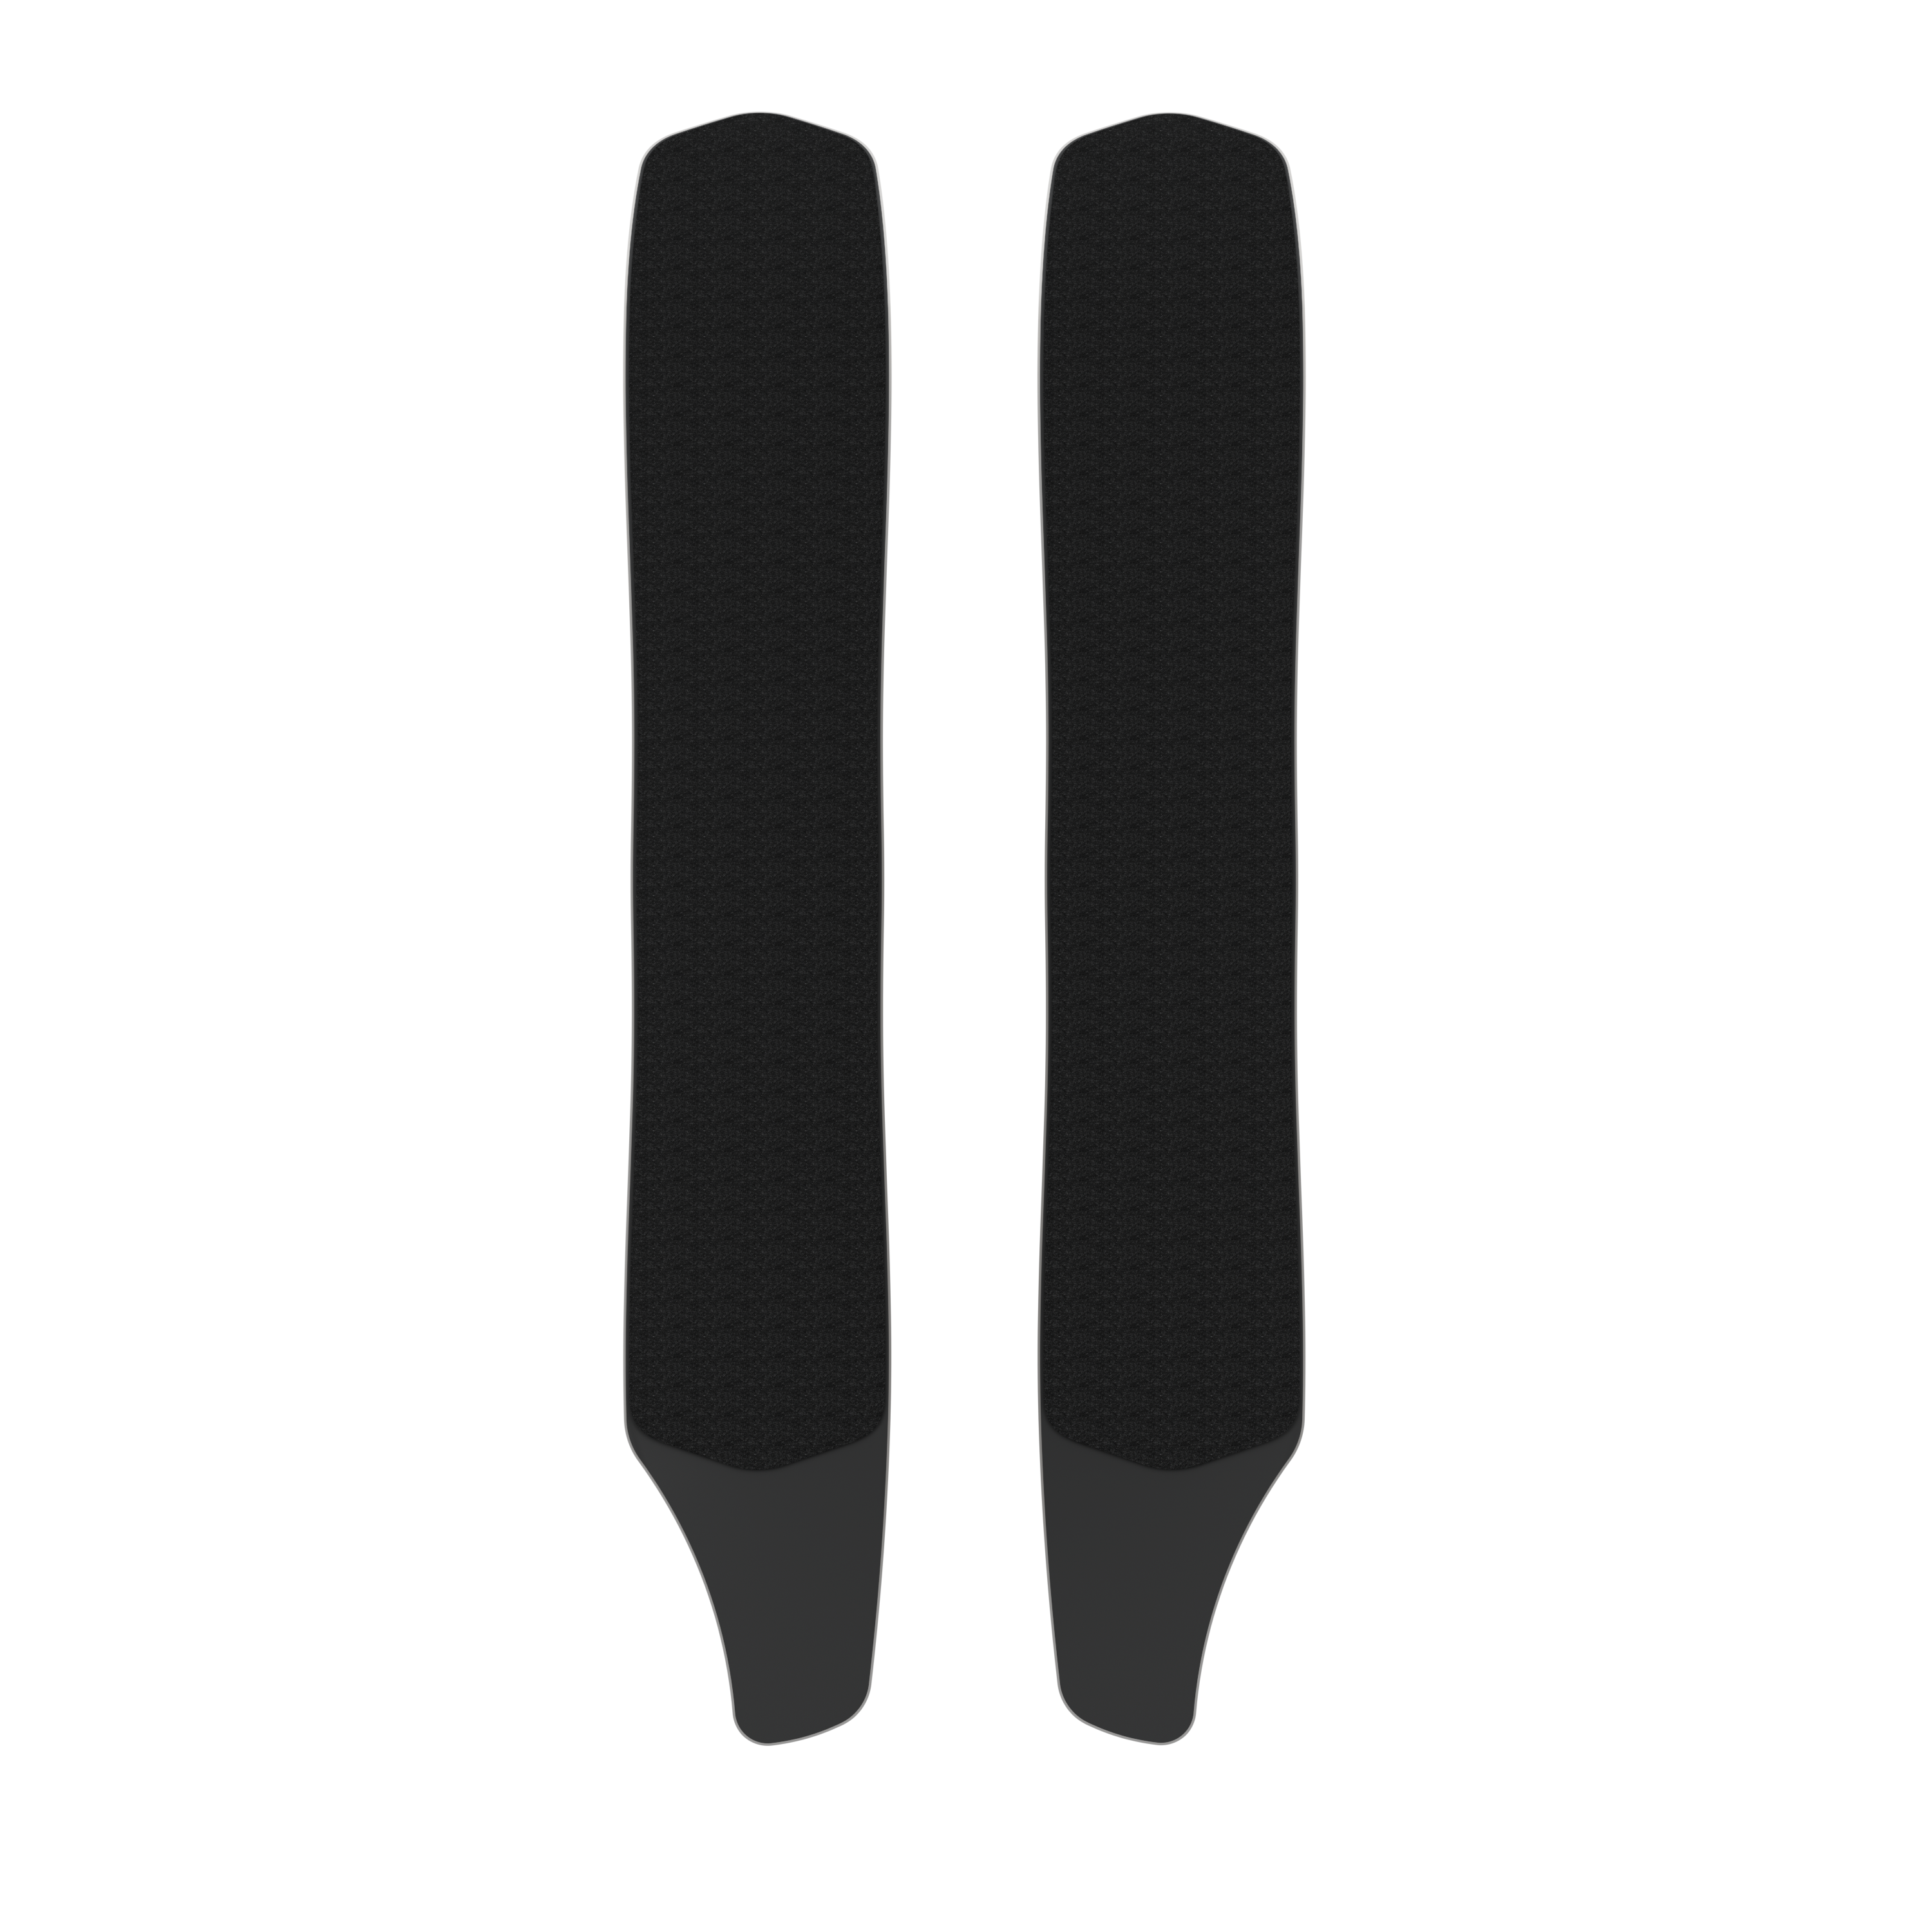 ROVER APPROACH SKIS